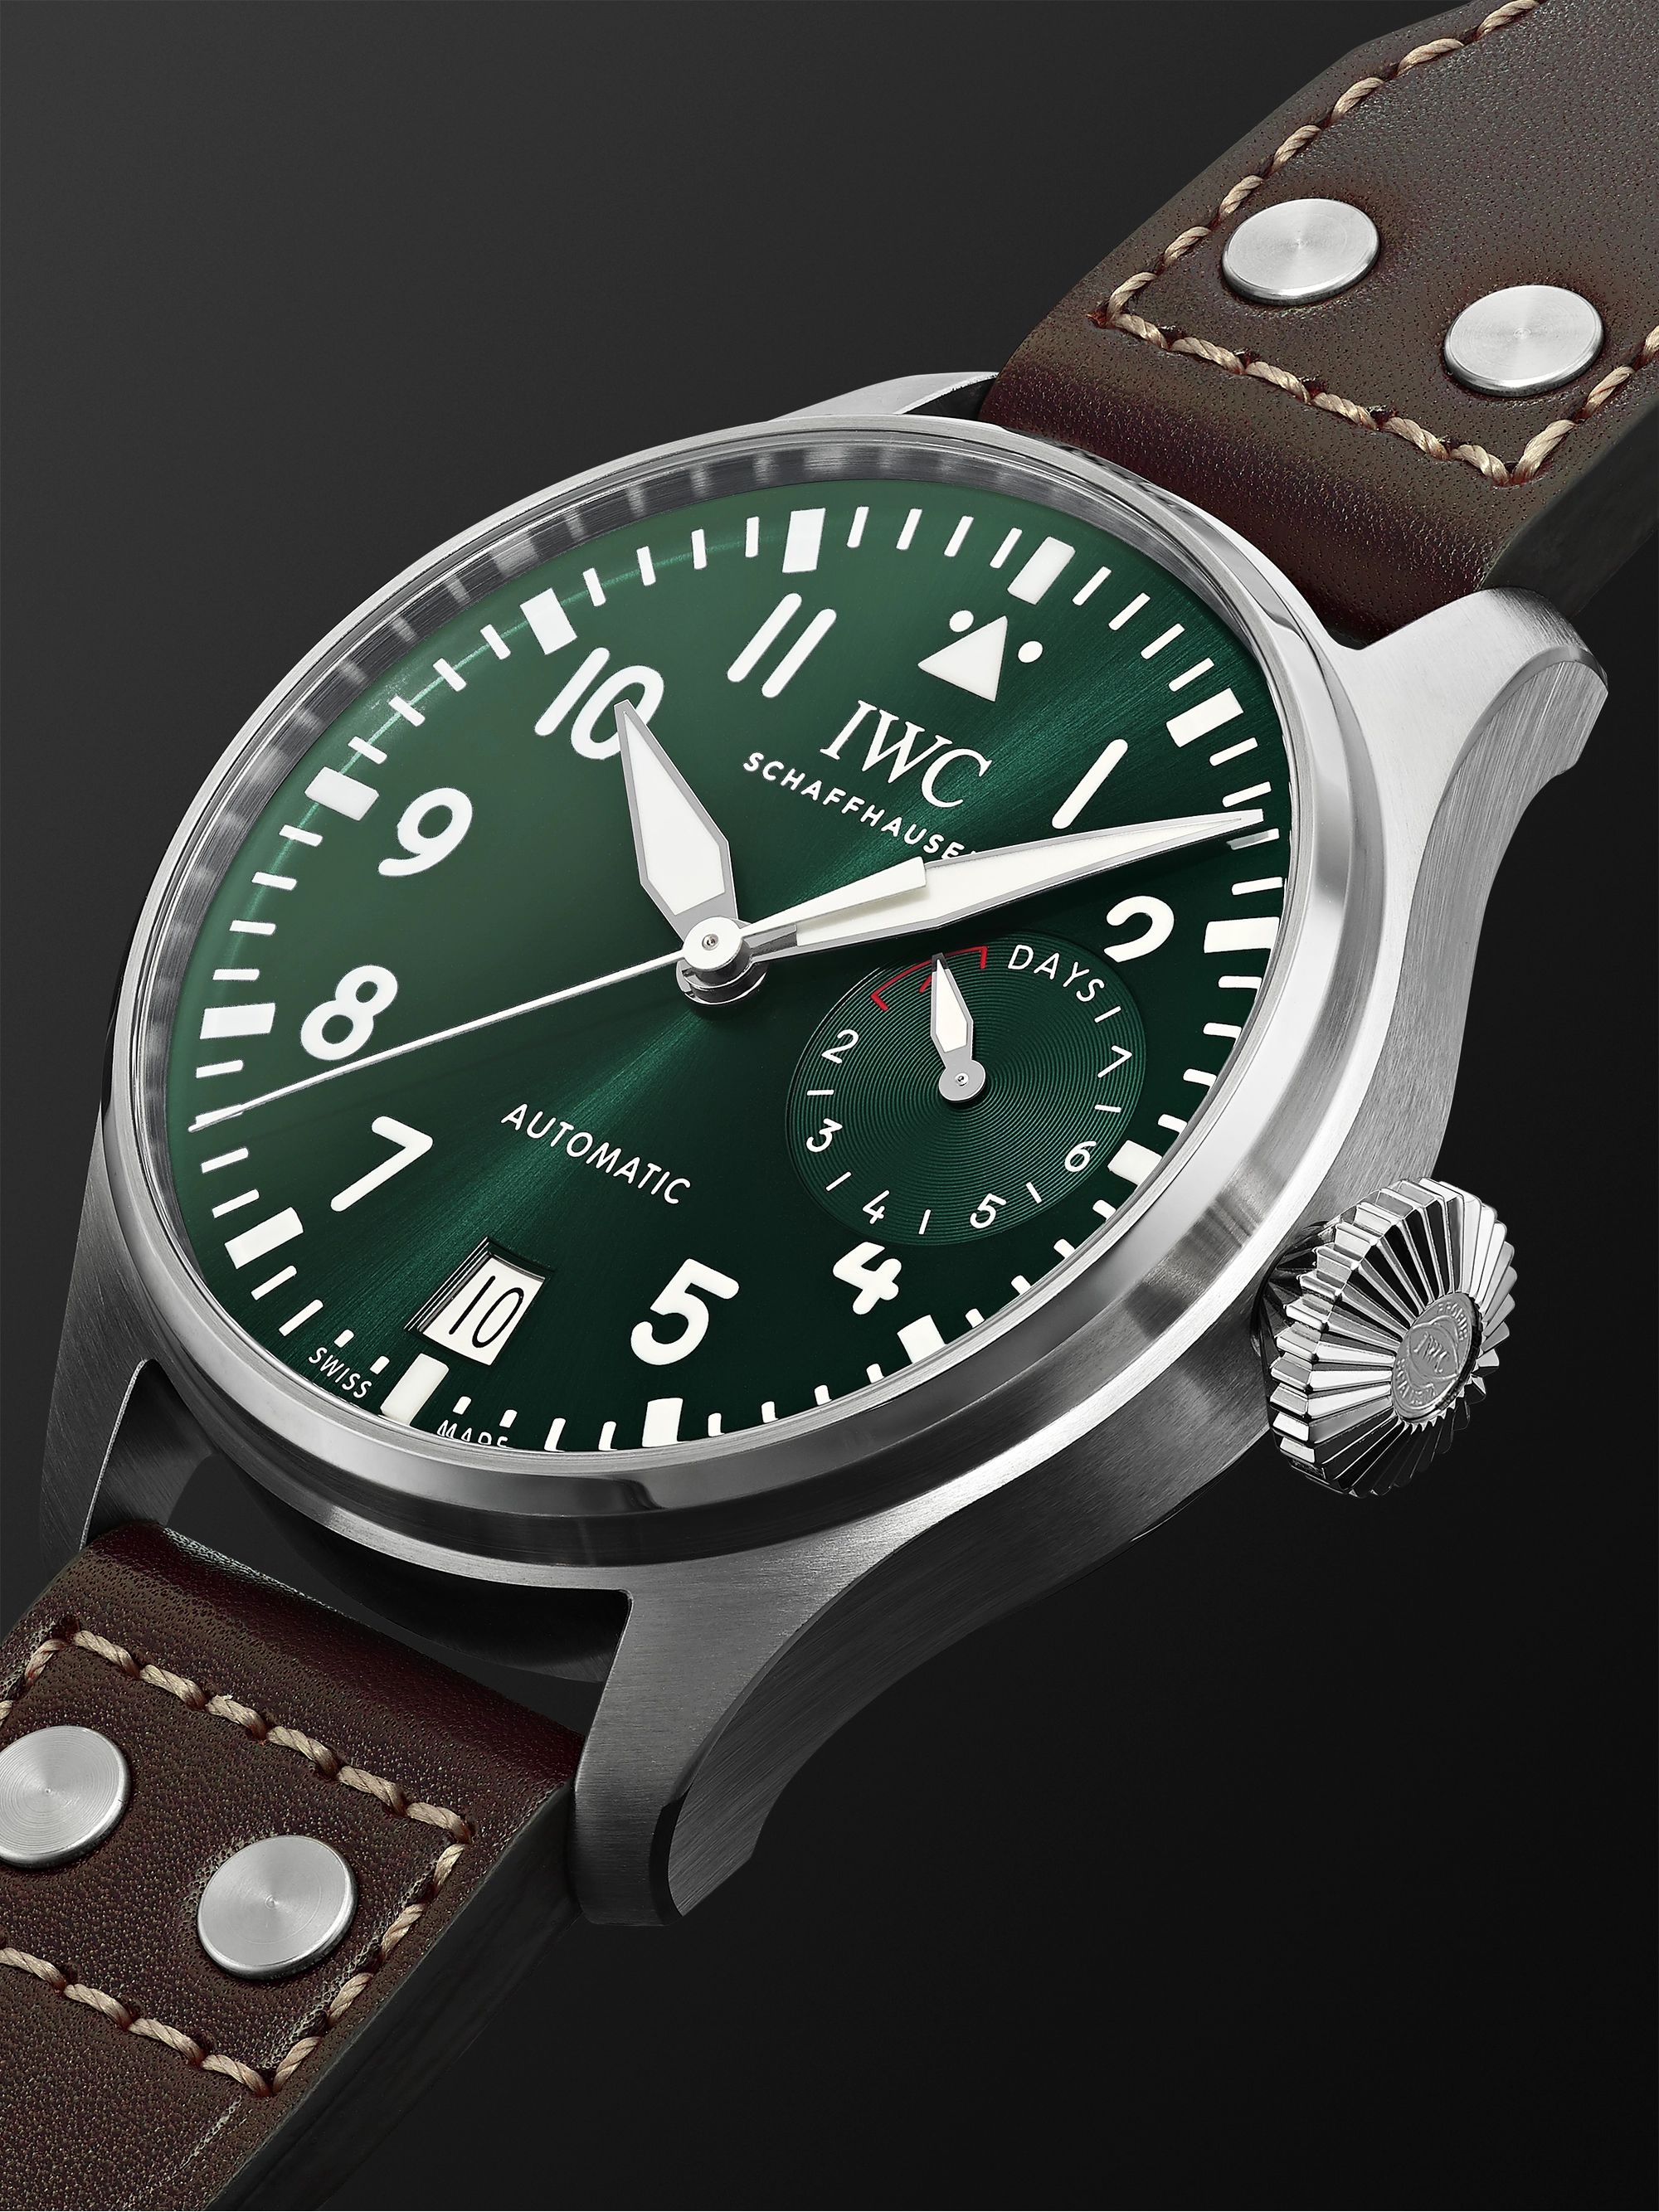 IWC SCHAFFHAUSEN Big Pilot's Automatic 46.2mm Stainless Steel and Leather Watch, Ref. No. IW501015